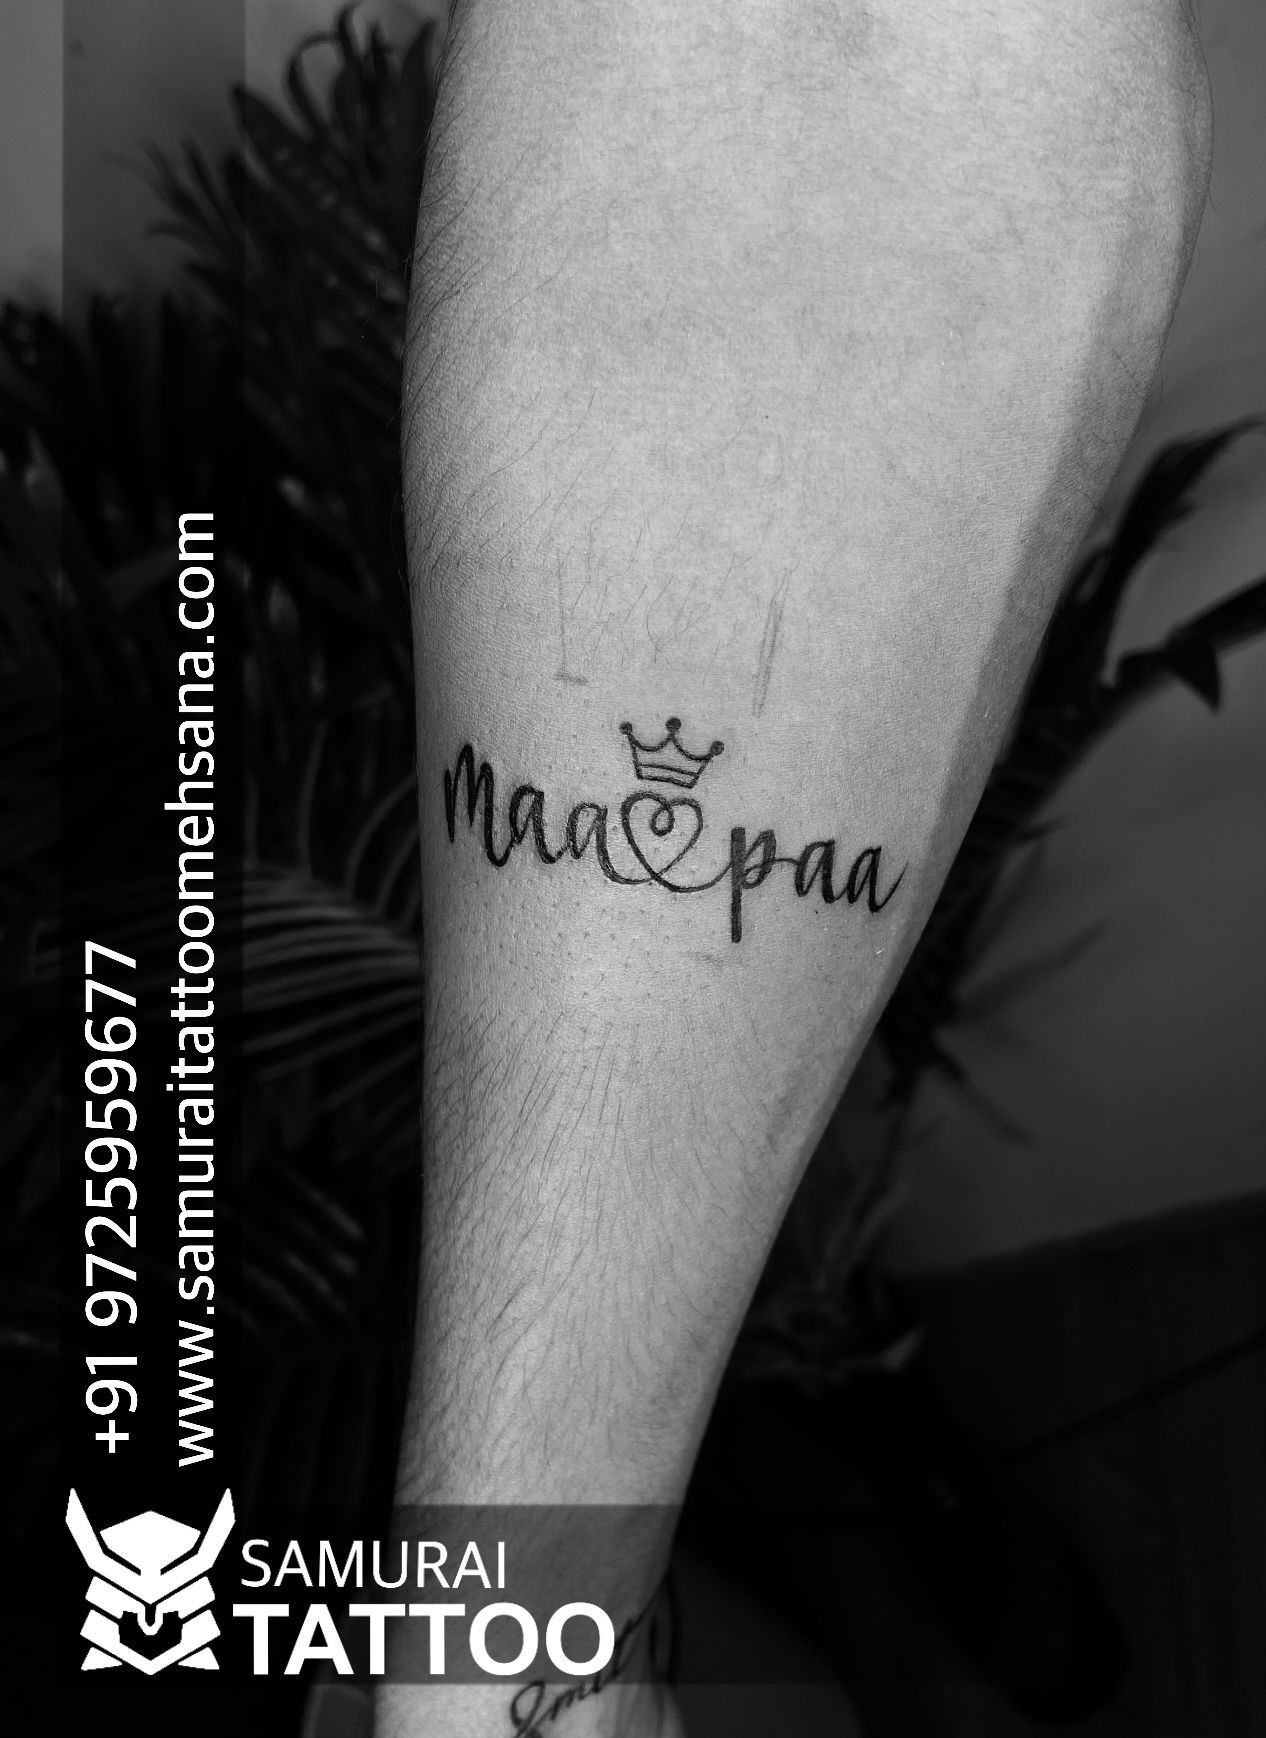 Twitter 上的LuckyMaa tattoo design When you look into your mothers eyes  you know that is the purest love you can find on this earth tattoo  angeltattoostudio indore httpstcoMmx5MI29fW  Twitter